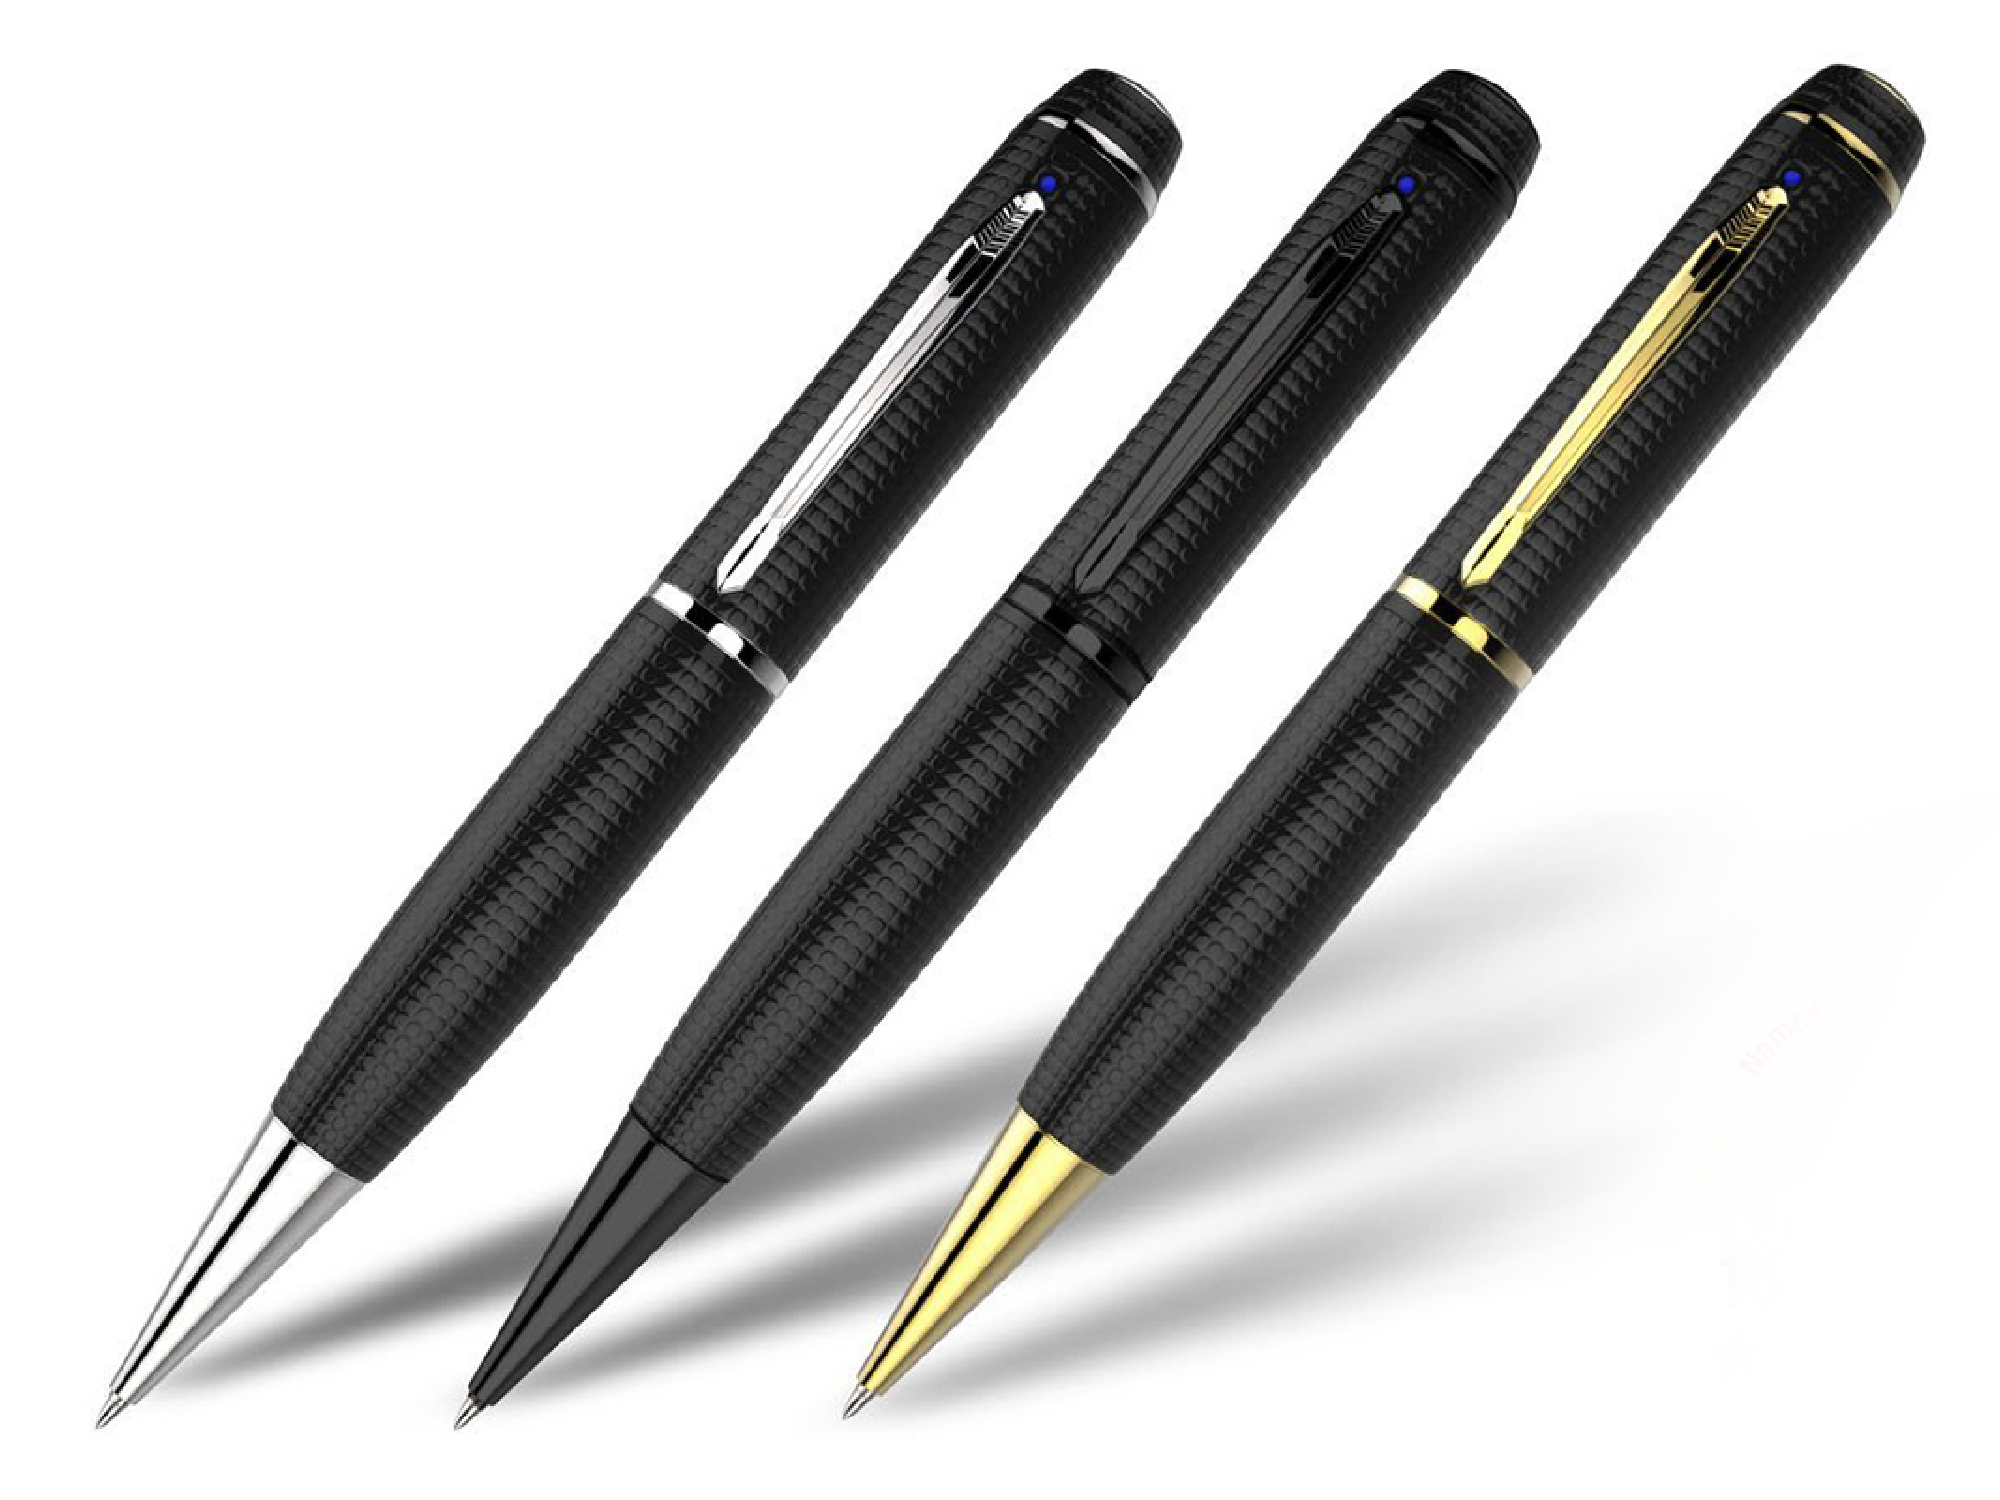 Save $48 on this pen with a hidden camera for a limited time